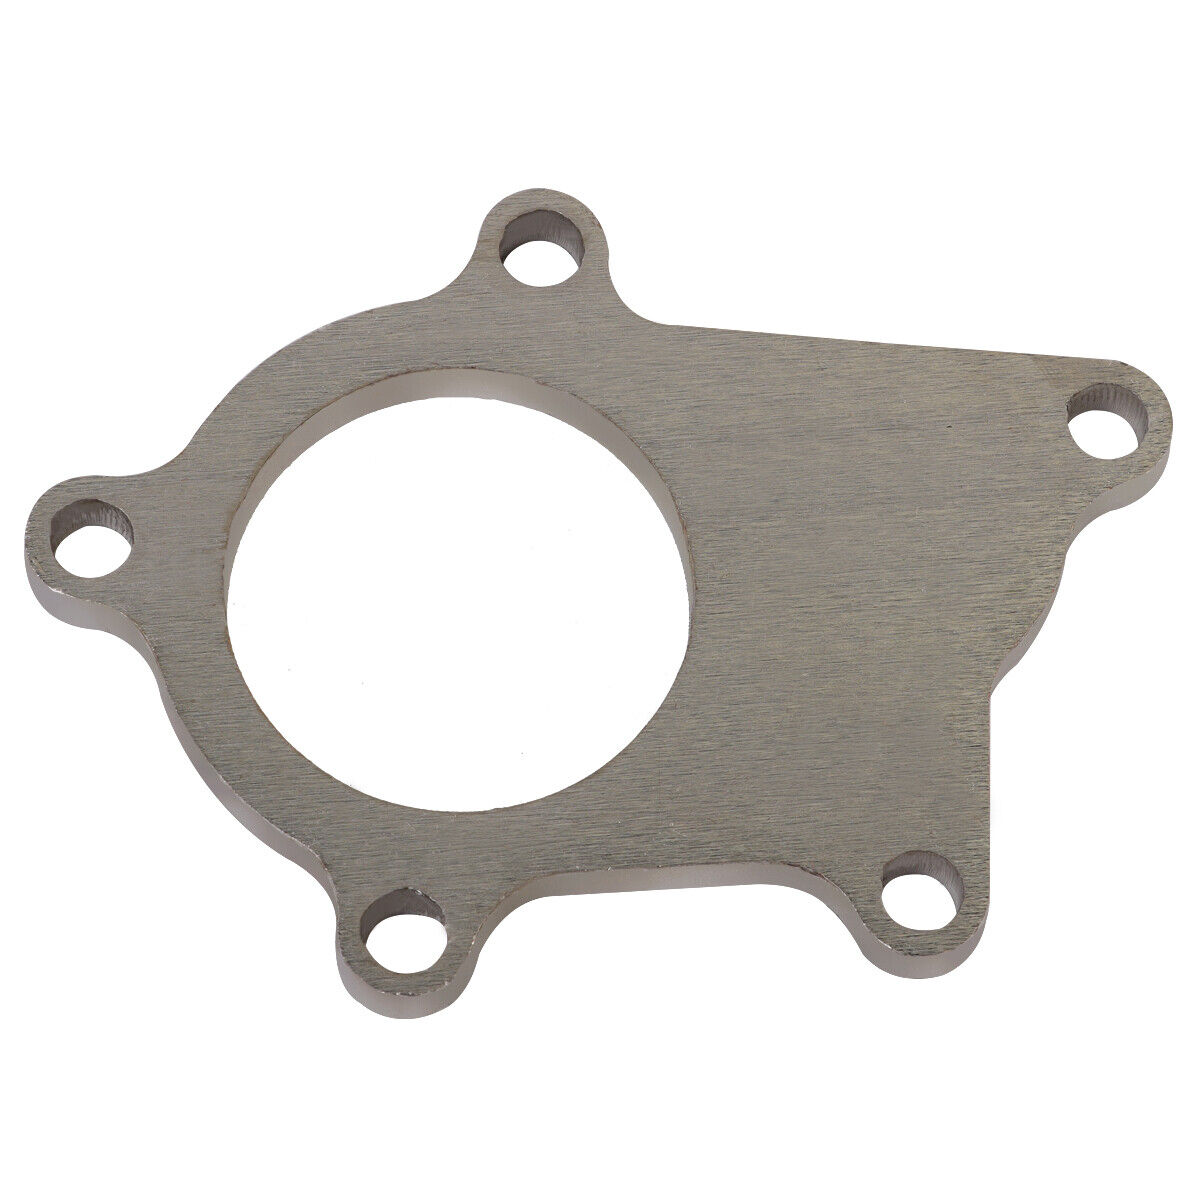 Universal T3/T4 TurboCharger Exhaust Plate 5 BOLT Downpipe FLANGE WELDABLE